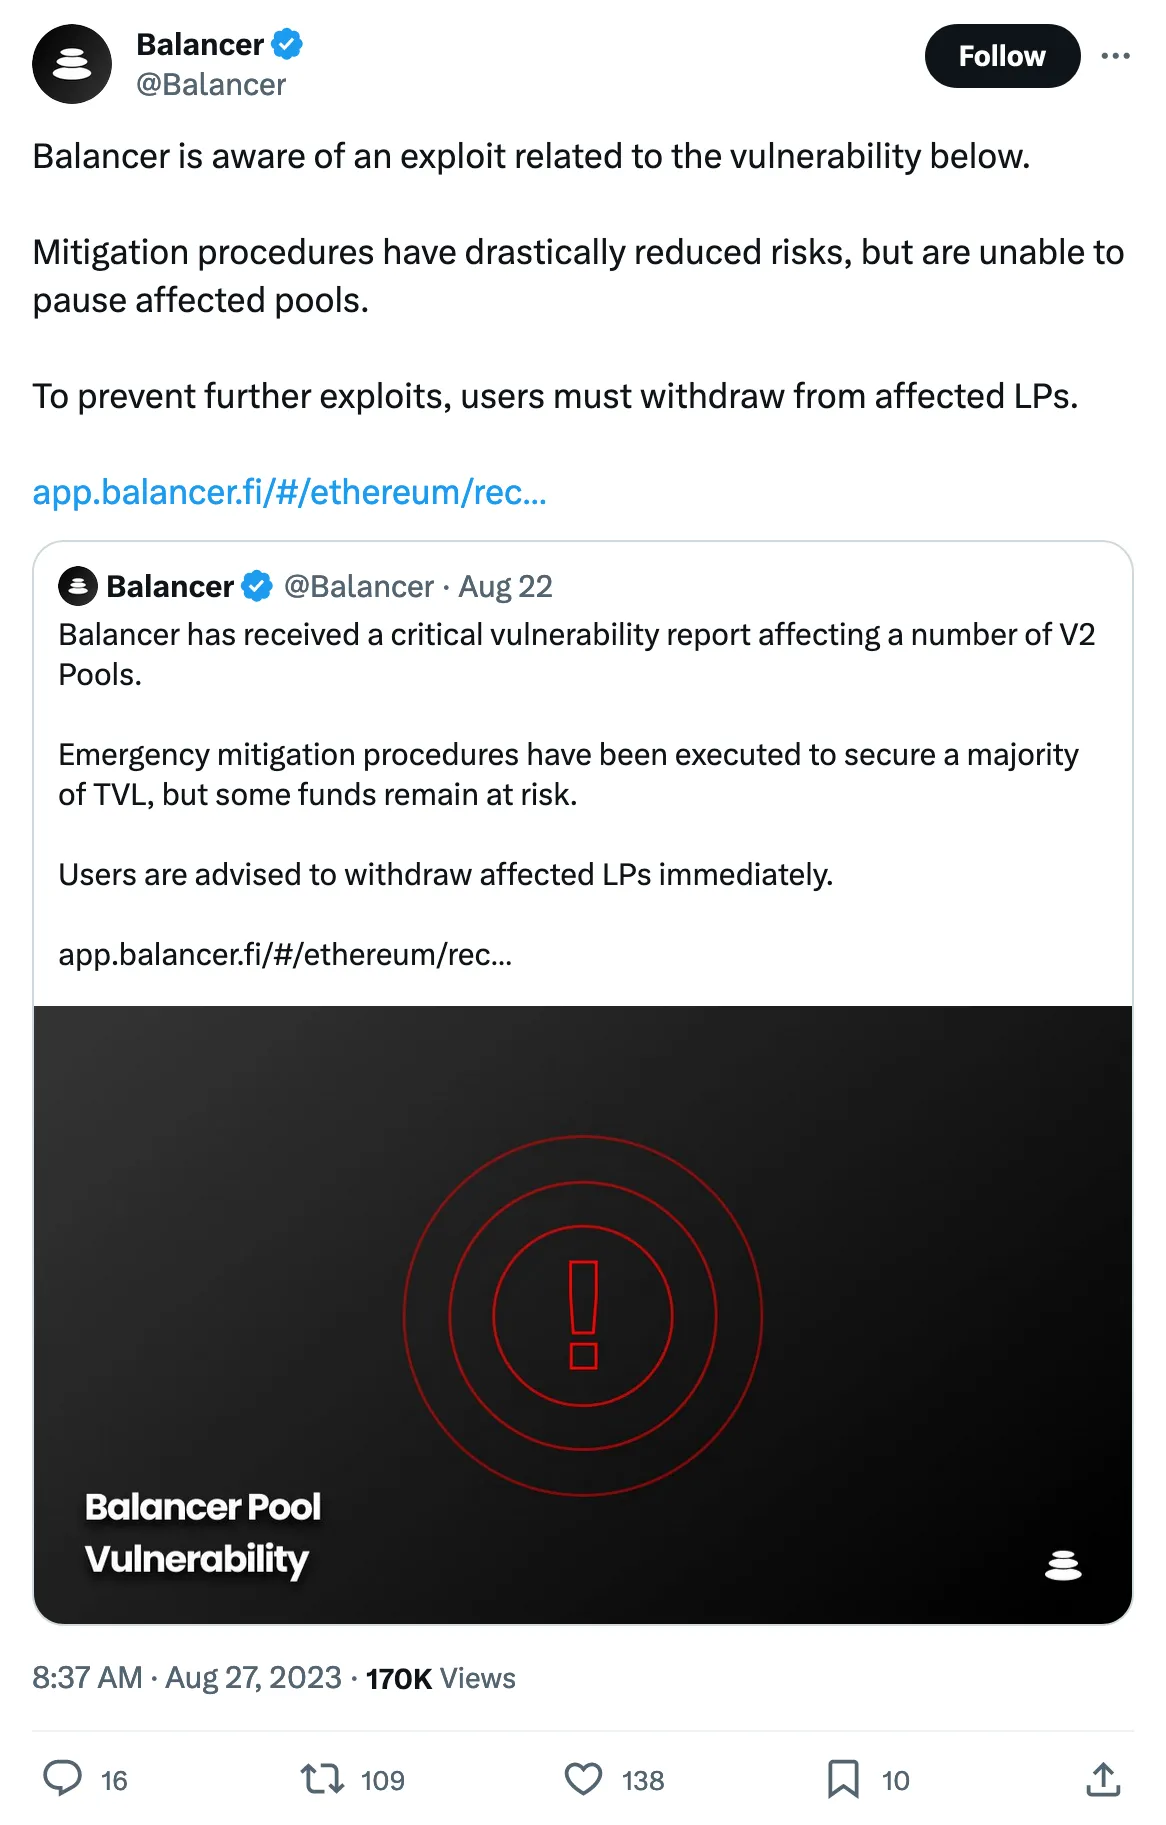 Balancer is aware of an exploit related to the vulnerability below.

Mitigation procedures have drastically reduced risks, but are unable to pause affected pools.

To prevent further exploits, users must withdraw from affected LPs.

https://app.balancer.fi/#/ethereum/recovery-exit… 
Tweeted at Aug 22